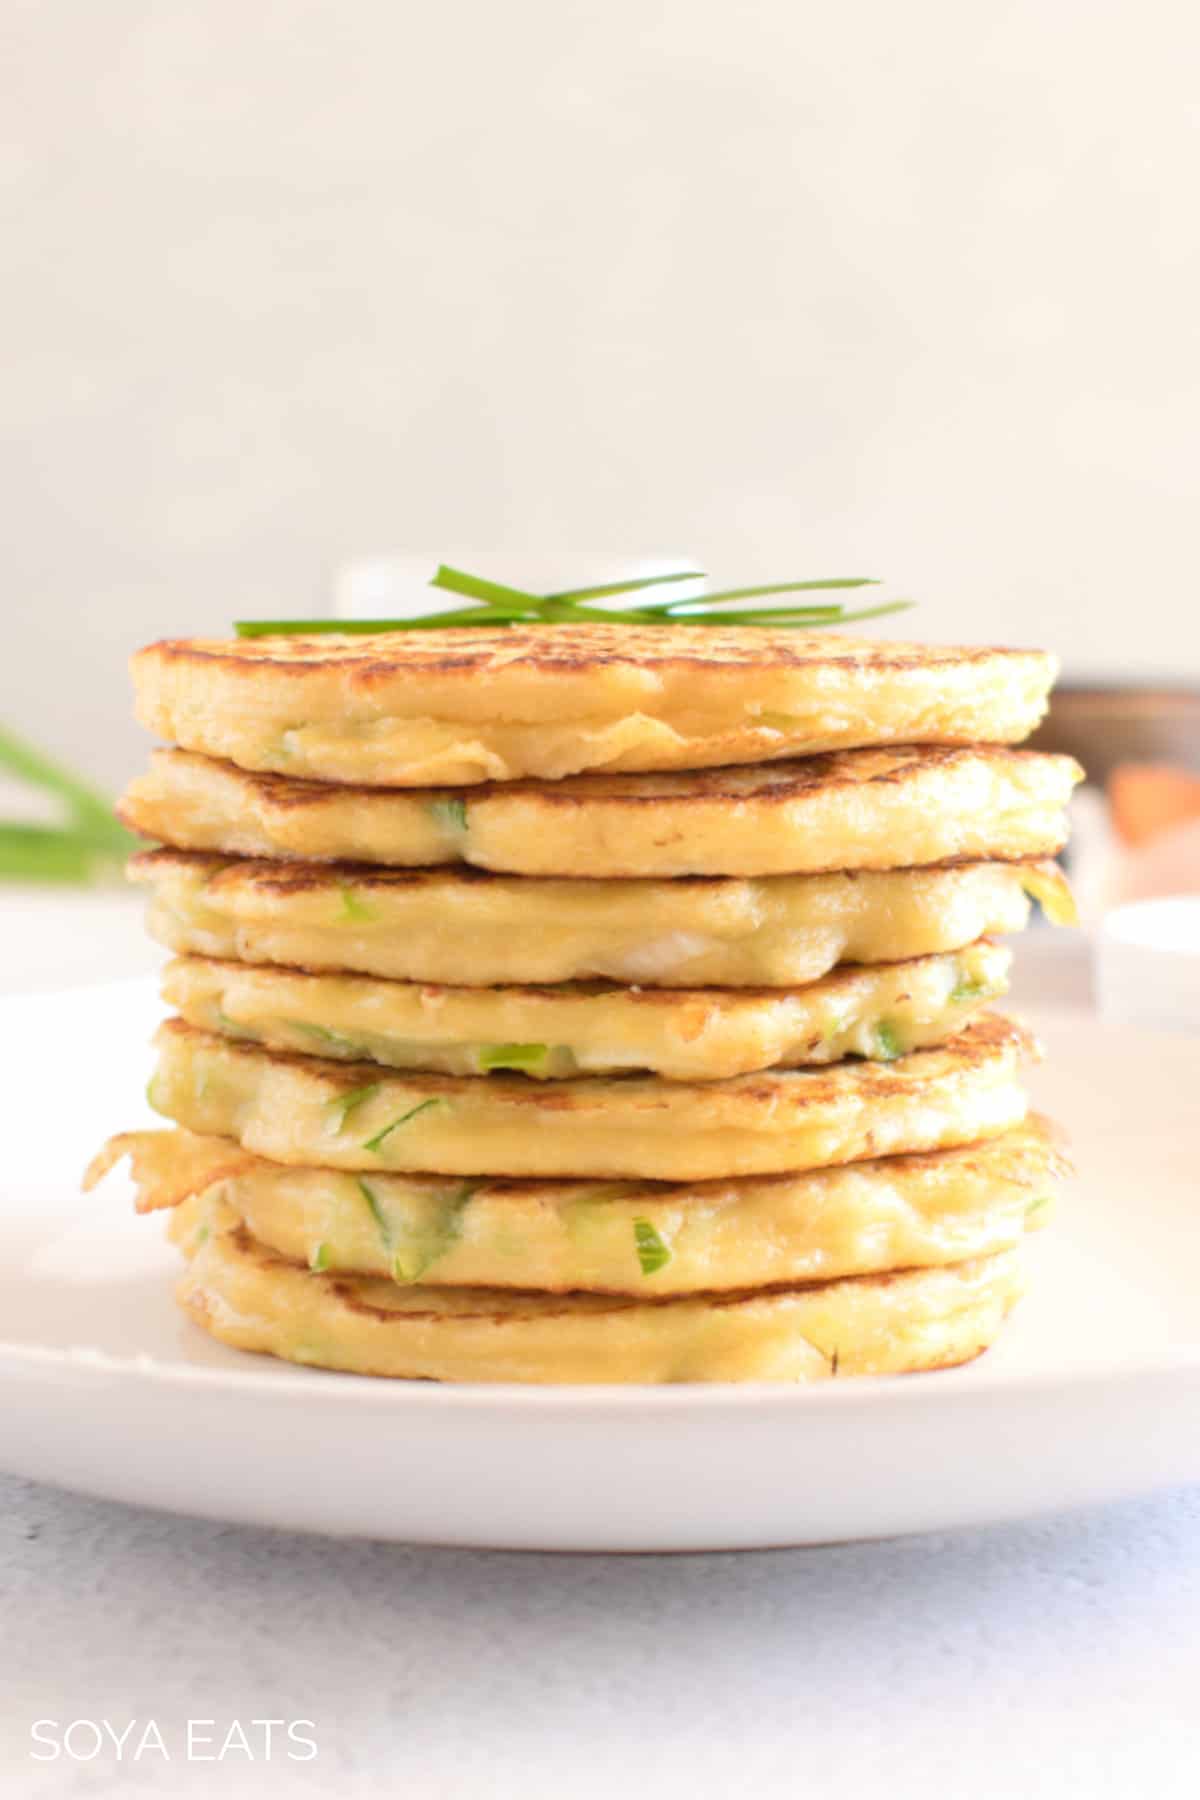 A stack of pancakes with spring onions.